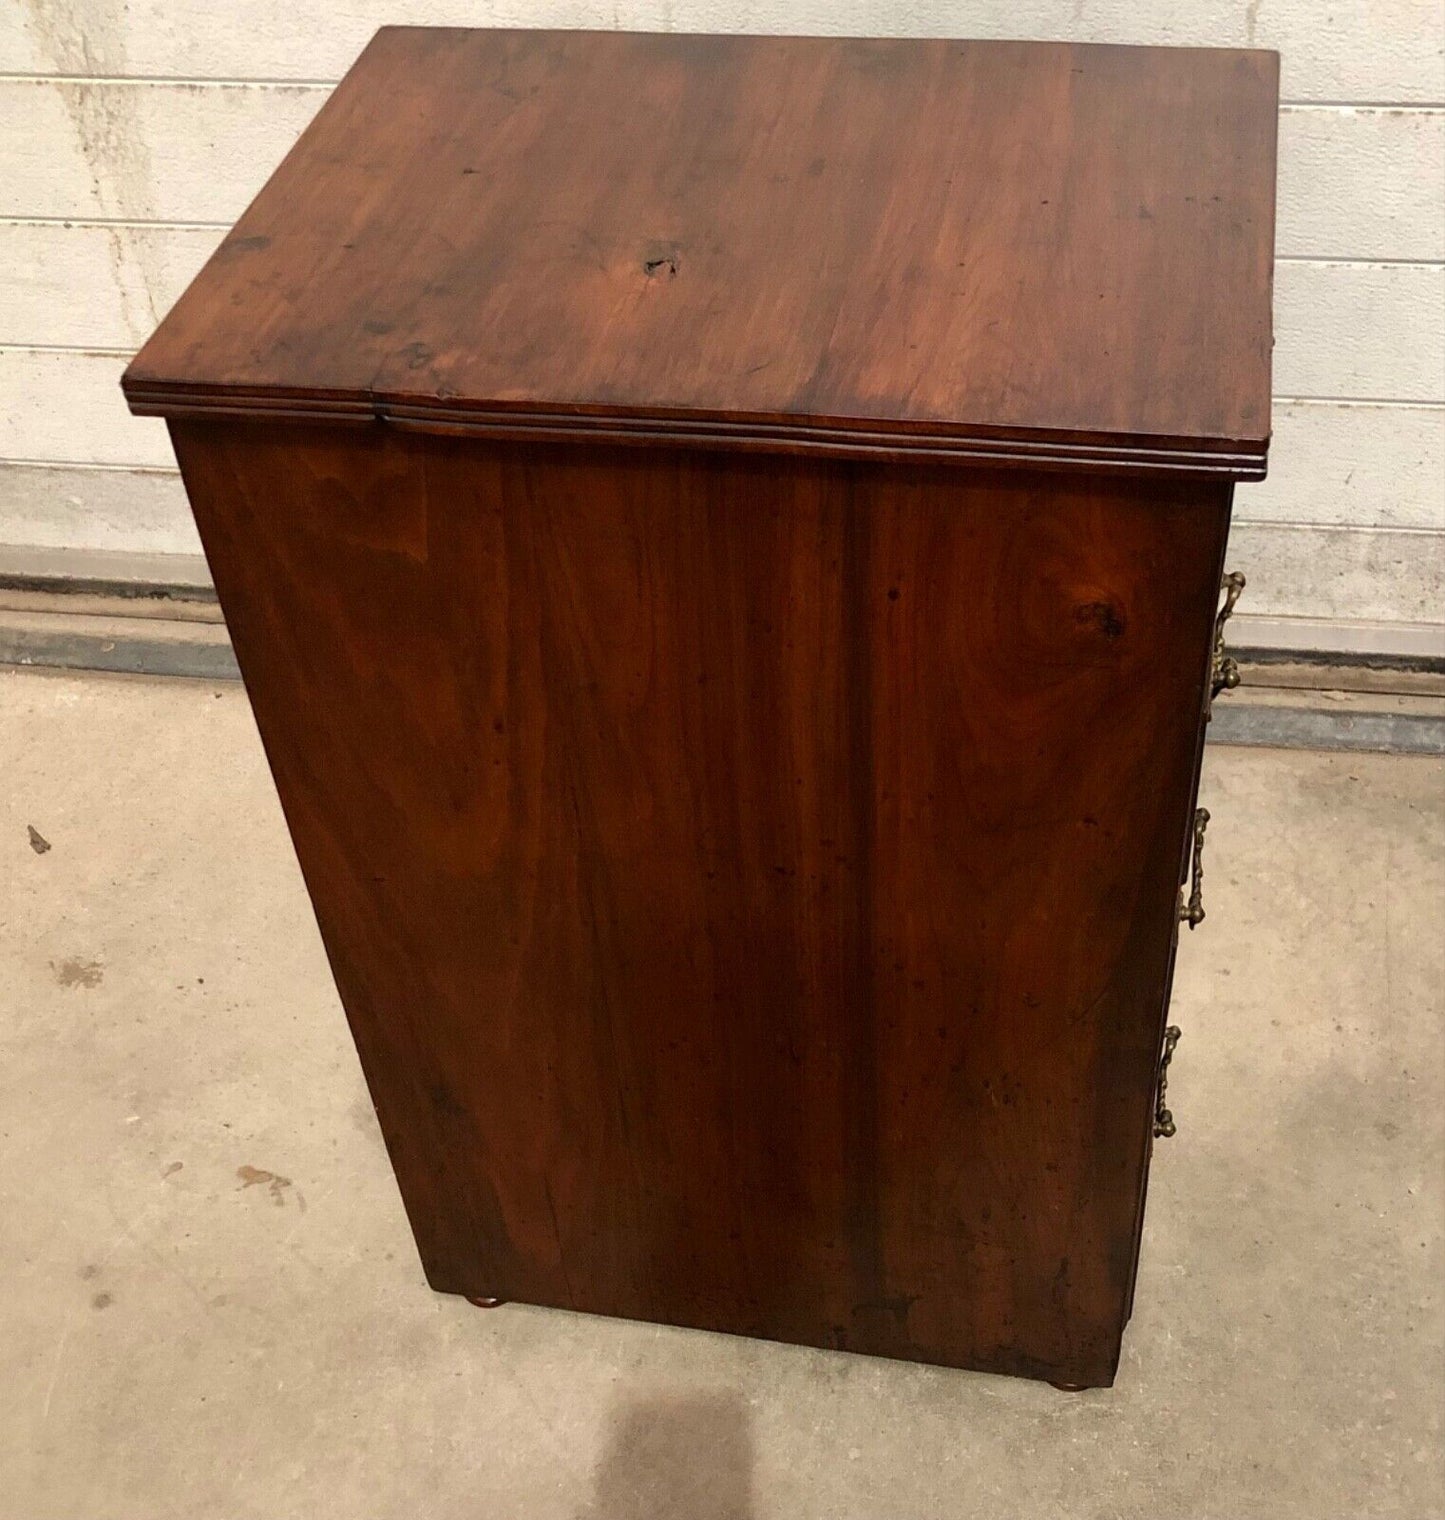 000821.....Handsome Antique Walnut Bedside Chest / Small Chest Of Drawers